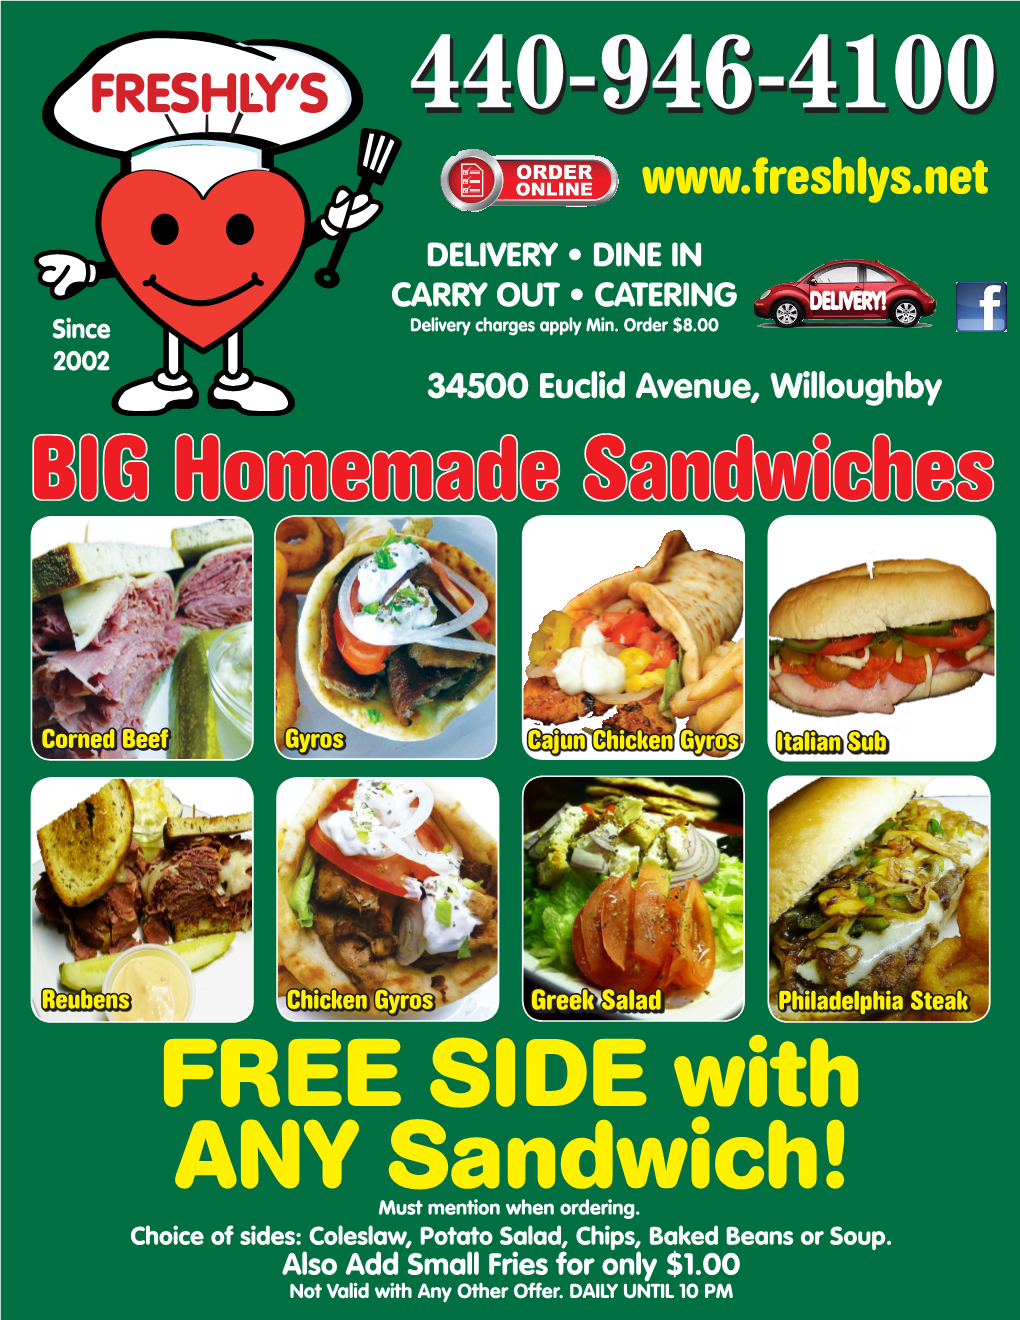 FREE SIDE with ANY Sandwich! Must Mention When Ordering